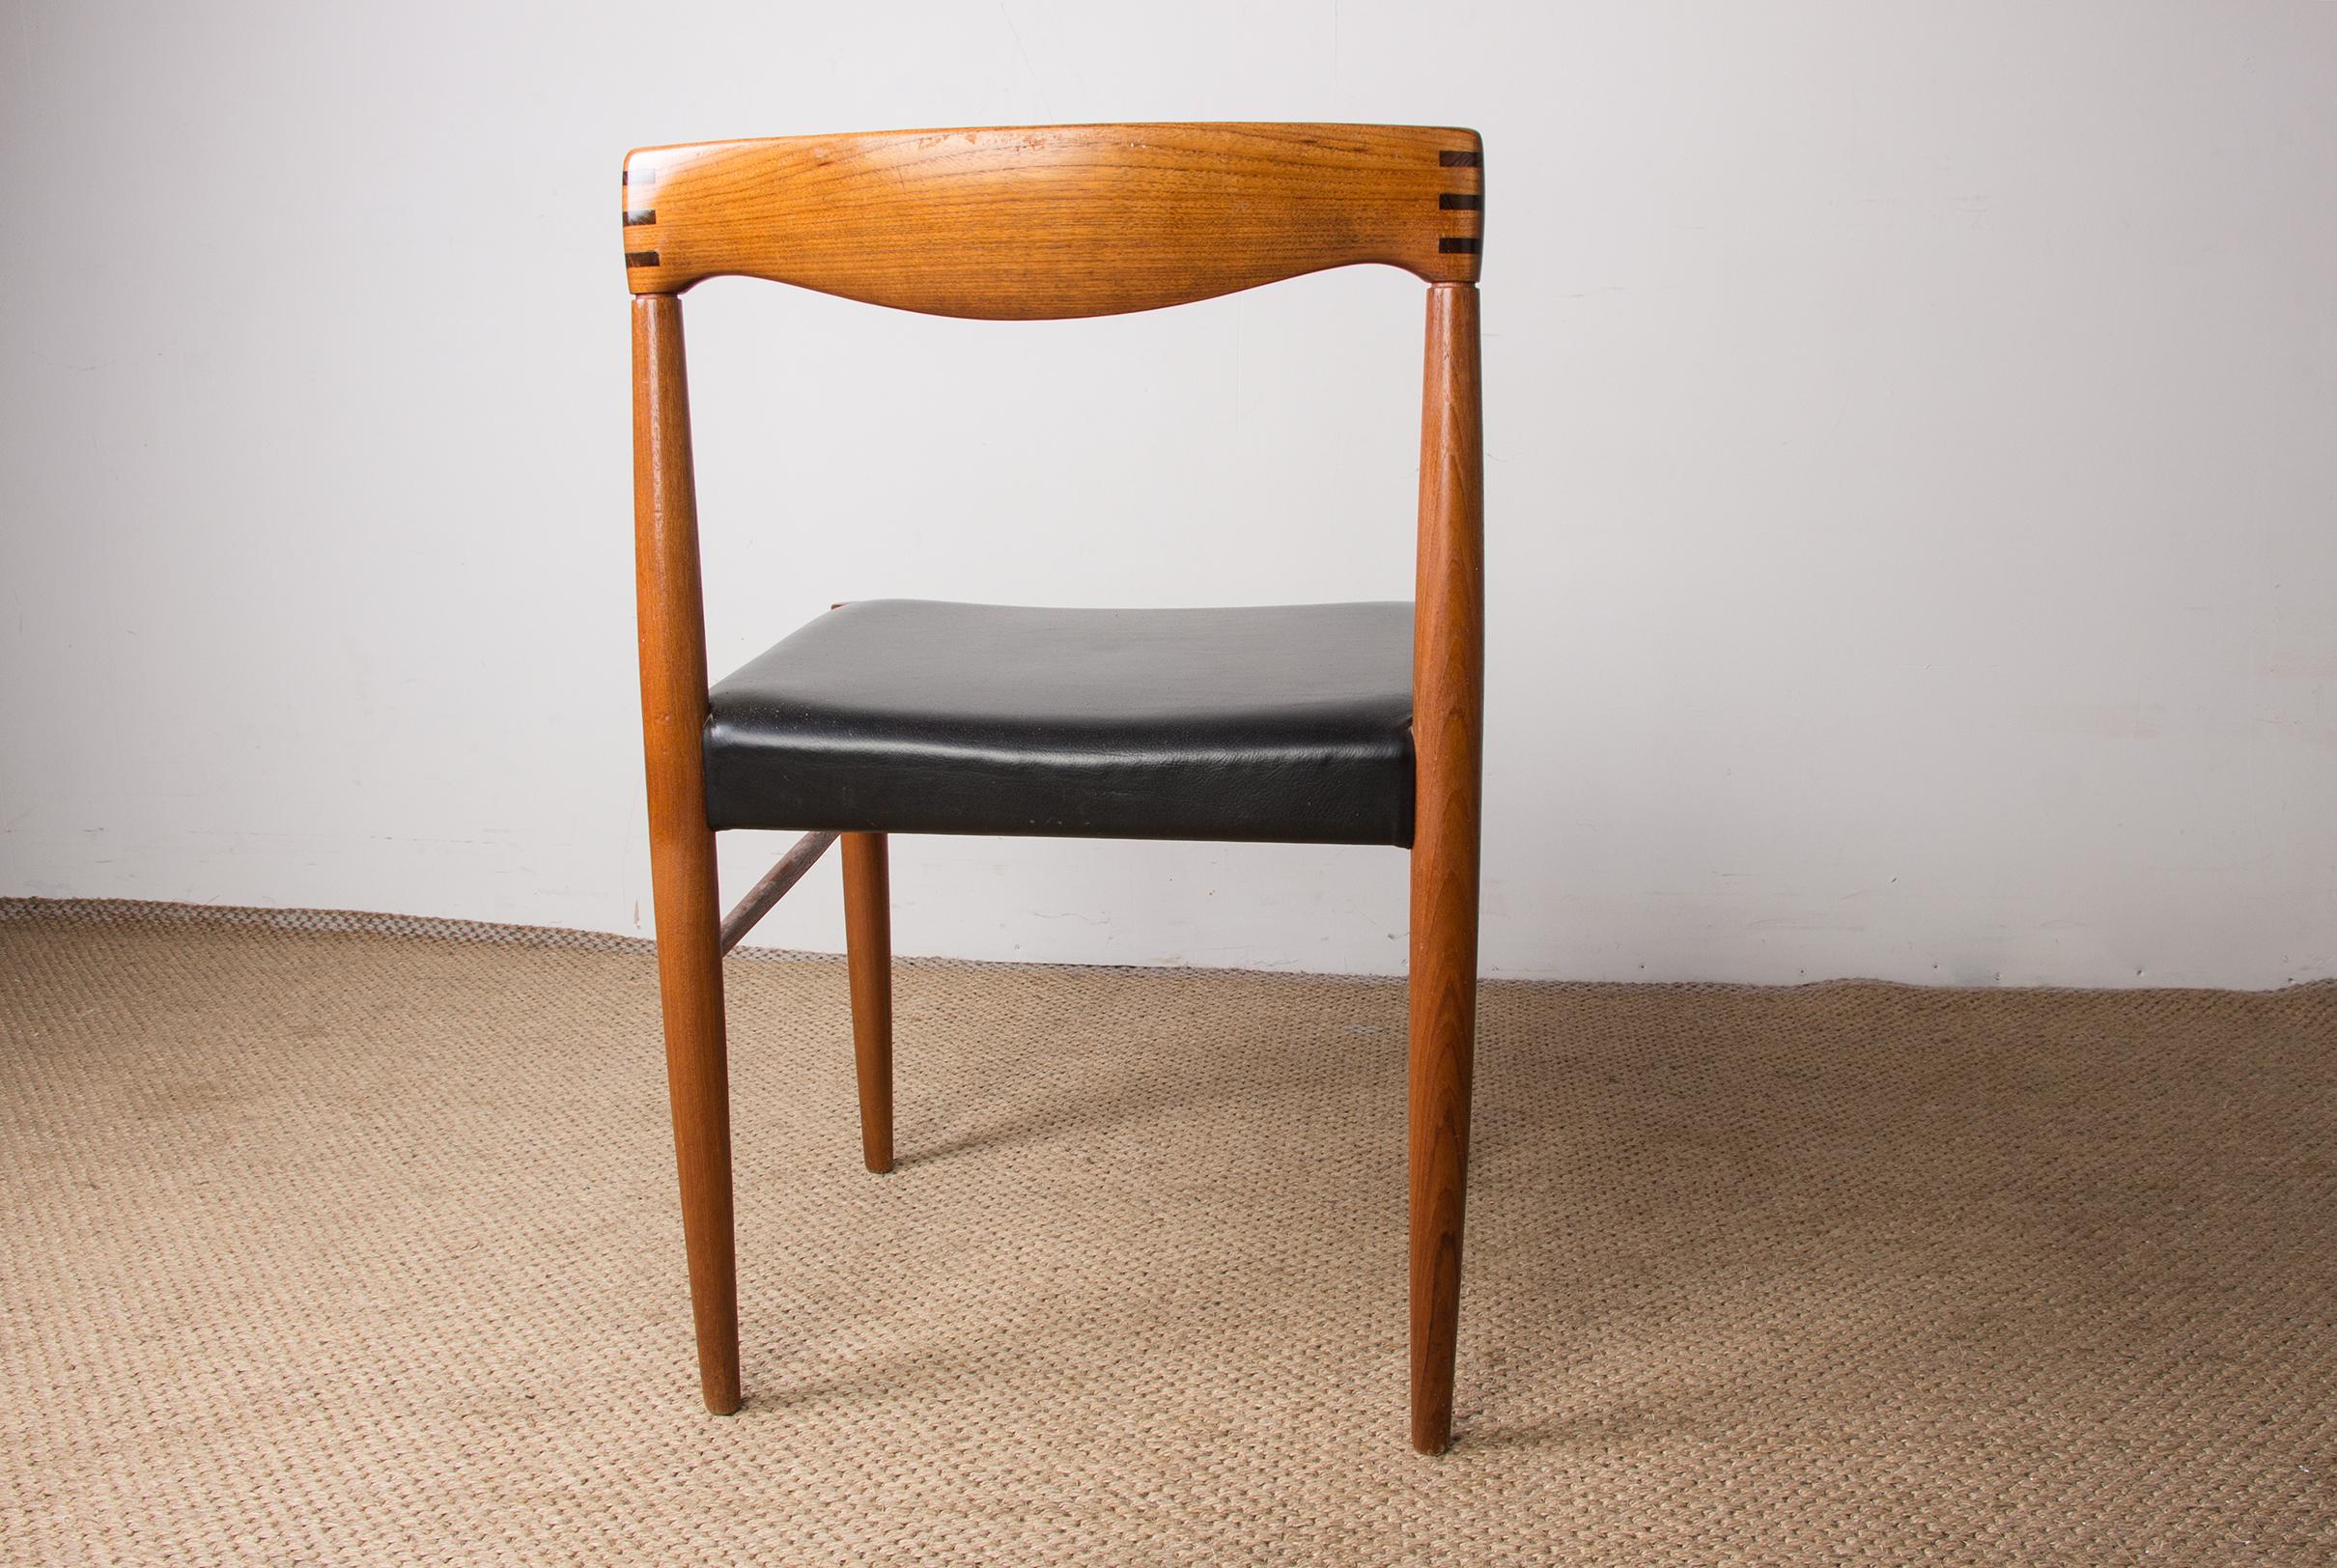 Series of 4 Danish Chairs in Oak and Black Leatherette by Henry Walter Klein for 9